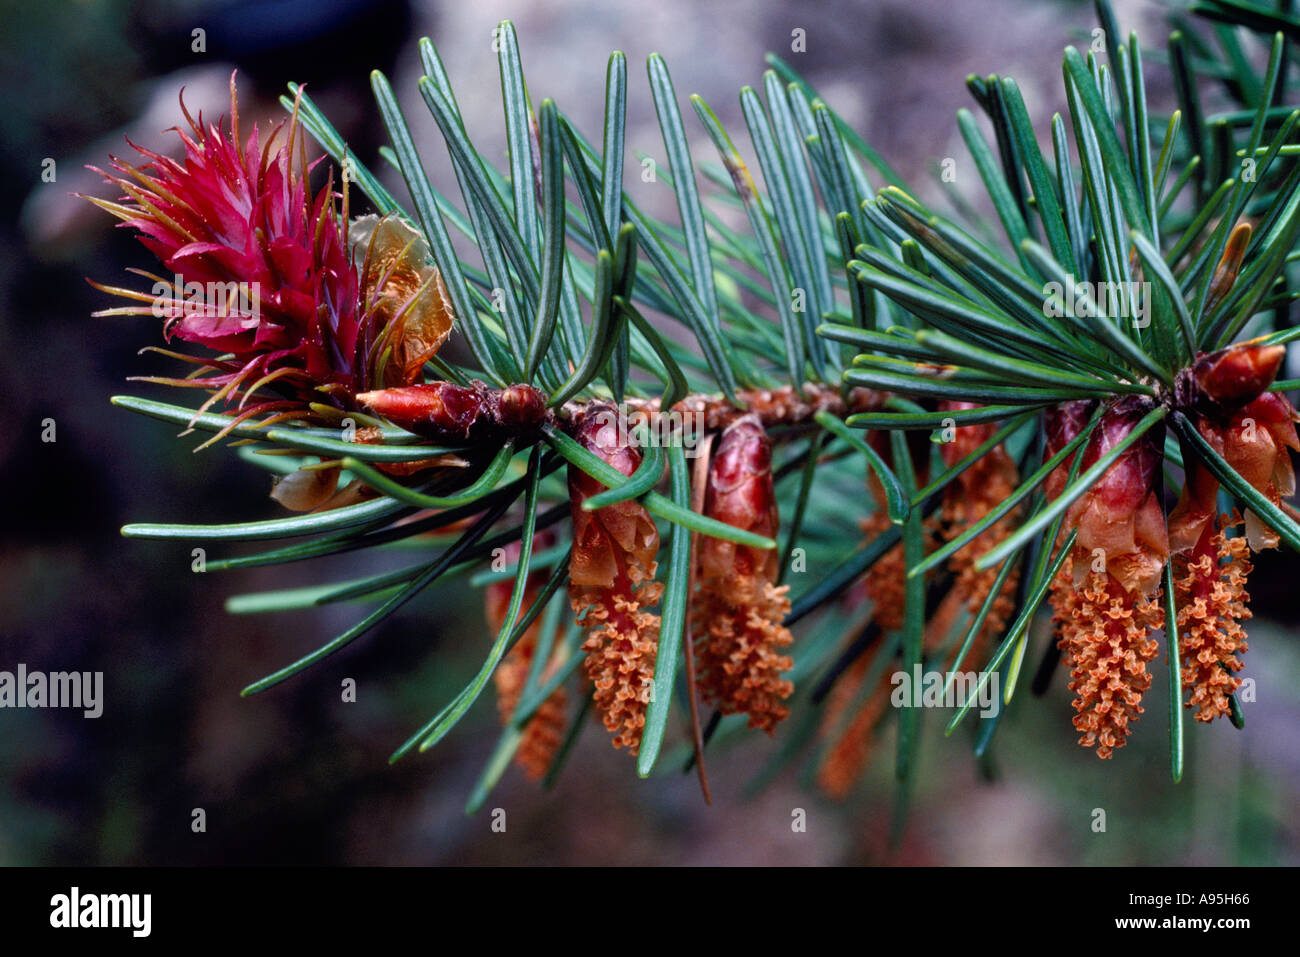 Pollen Cones, Flower / Seed Cone, and Needles on a Douglas Fir Tree (Pseudotsuga menziesii), British Columbia, Canada Stock Photo